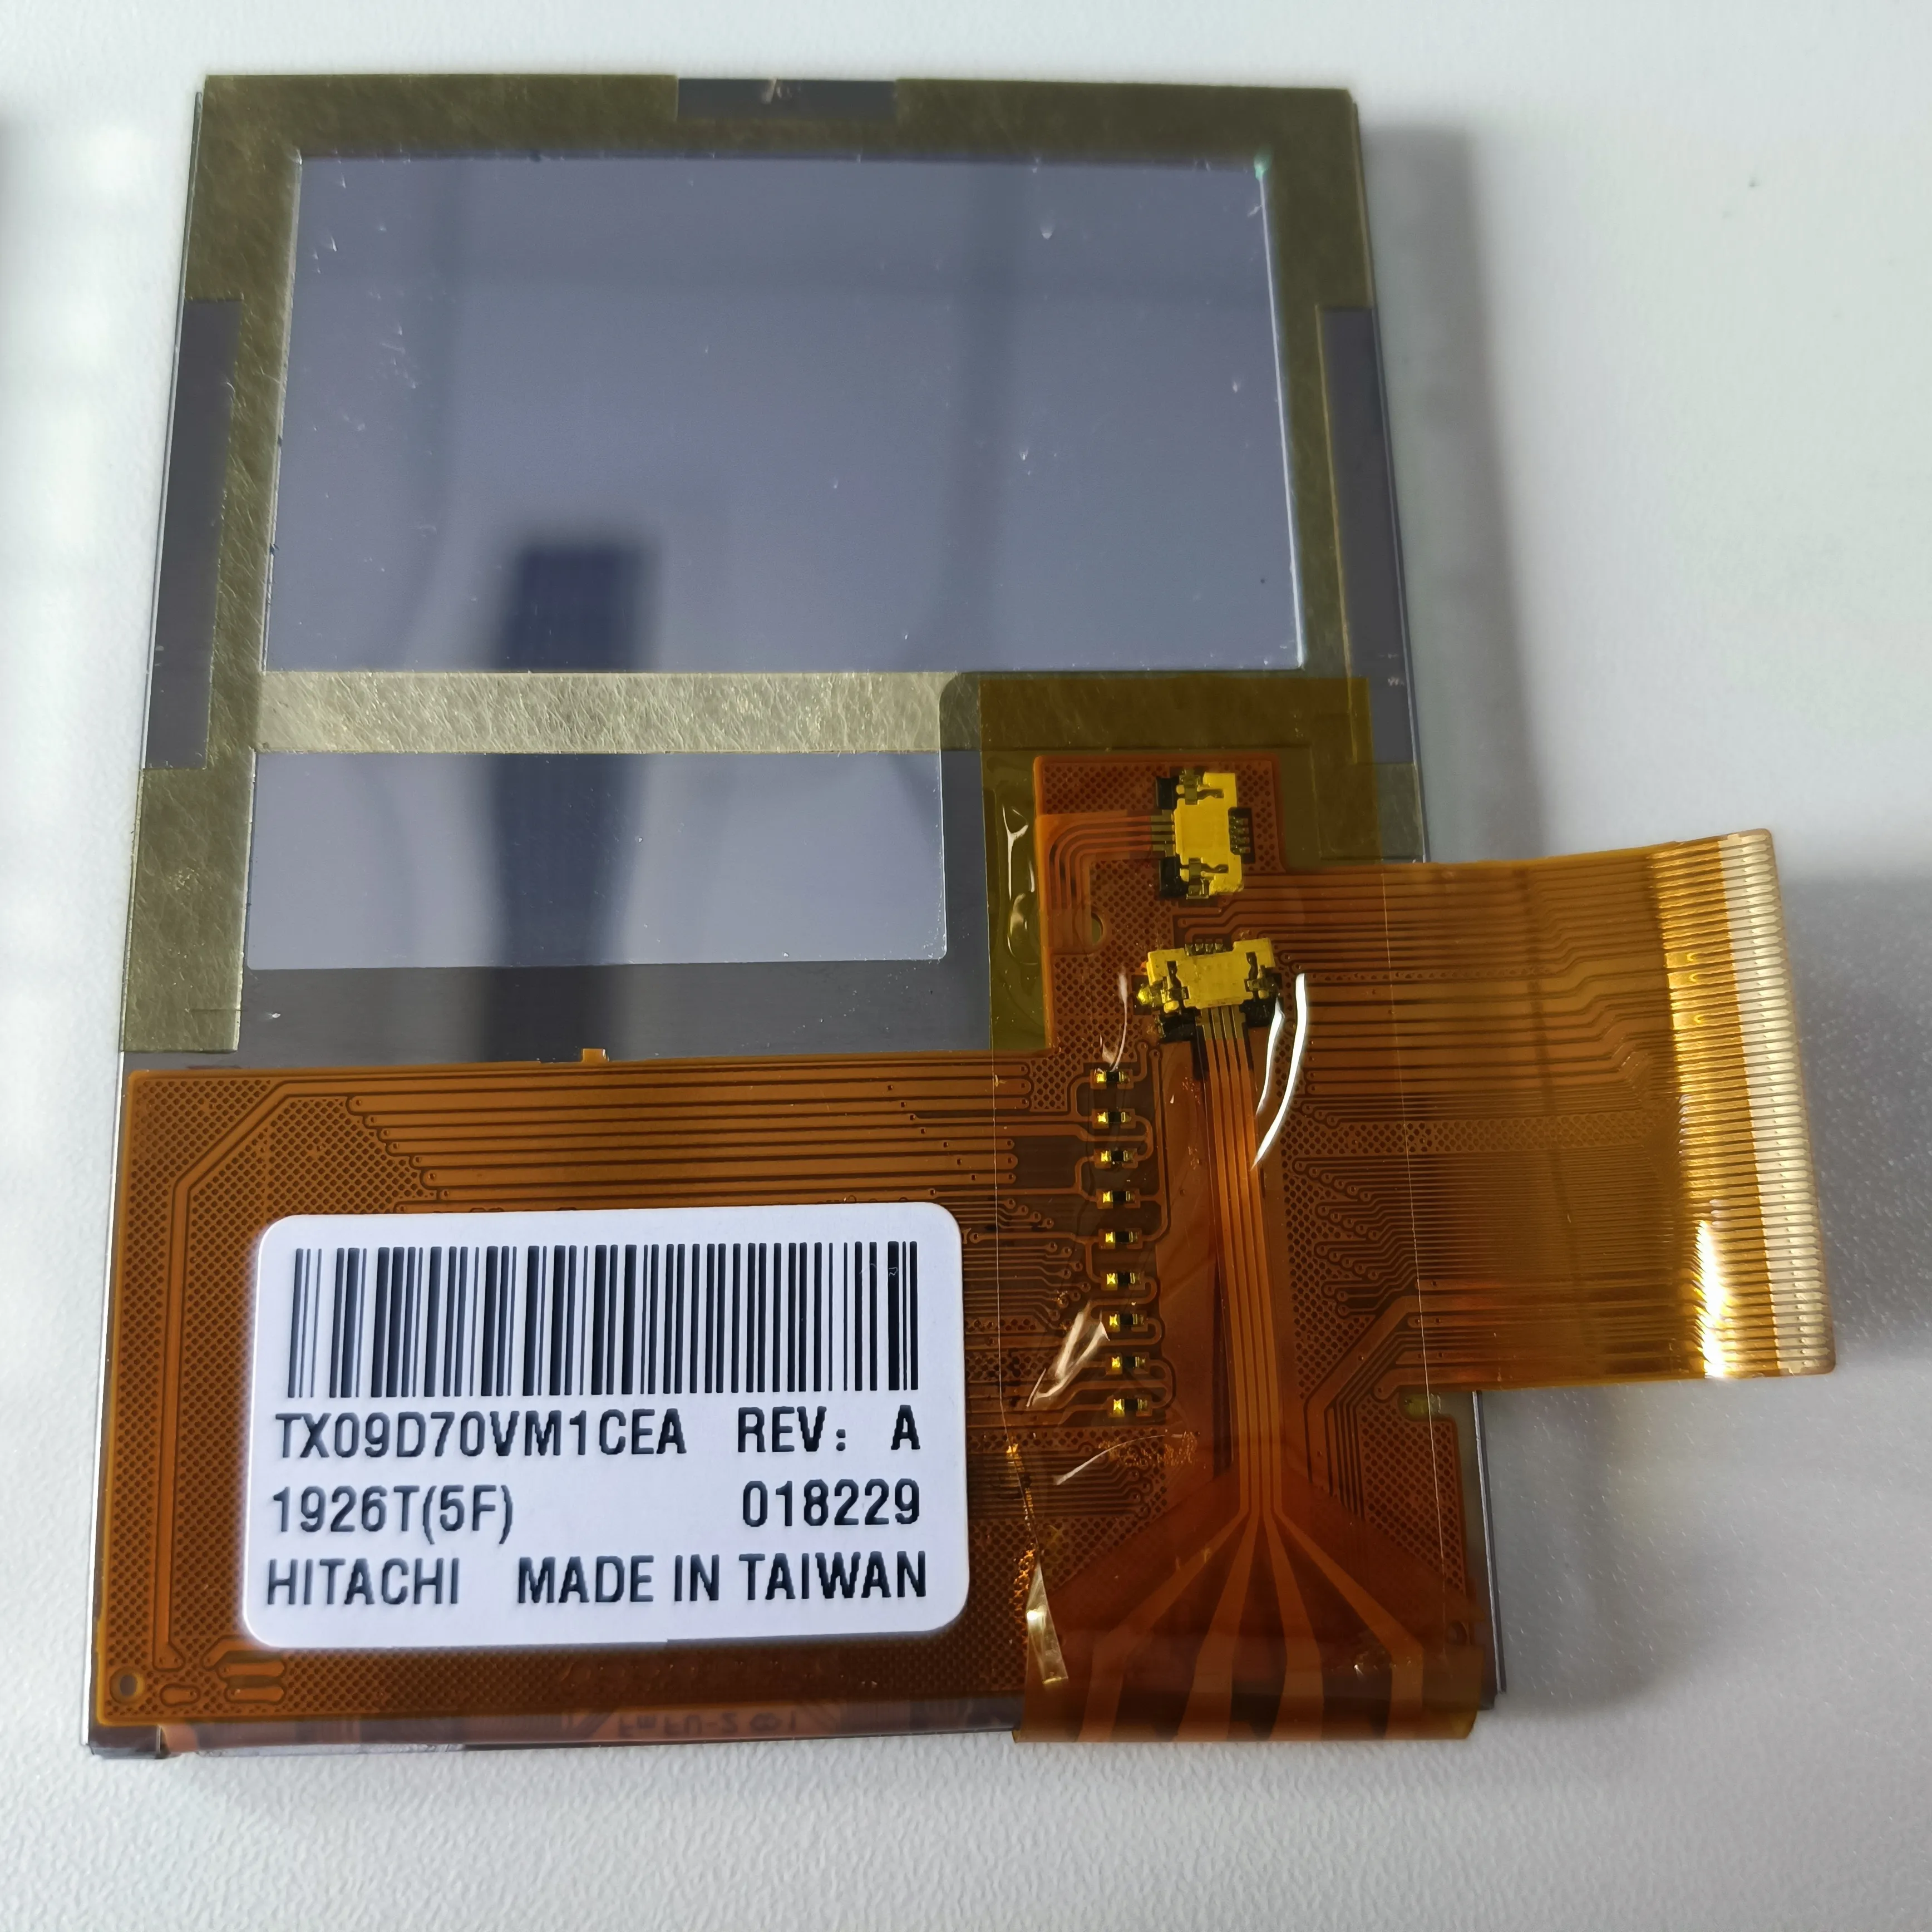 3.5'' Inch TX09D70VM1CDA TX09D80VM1CCA TX09D80VM3CCA Lcd Display Screen Panel Without PCB